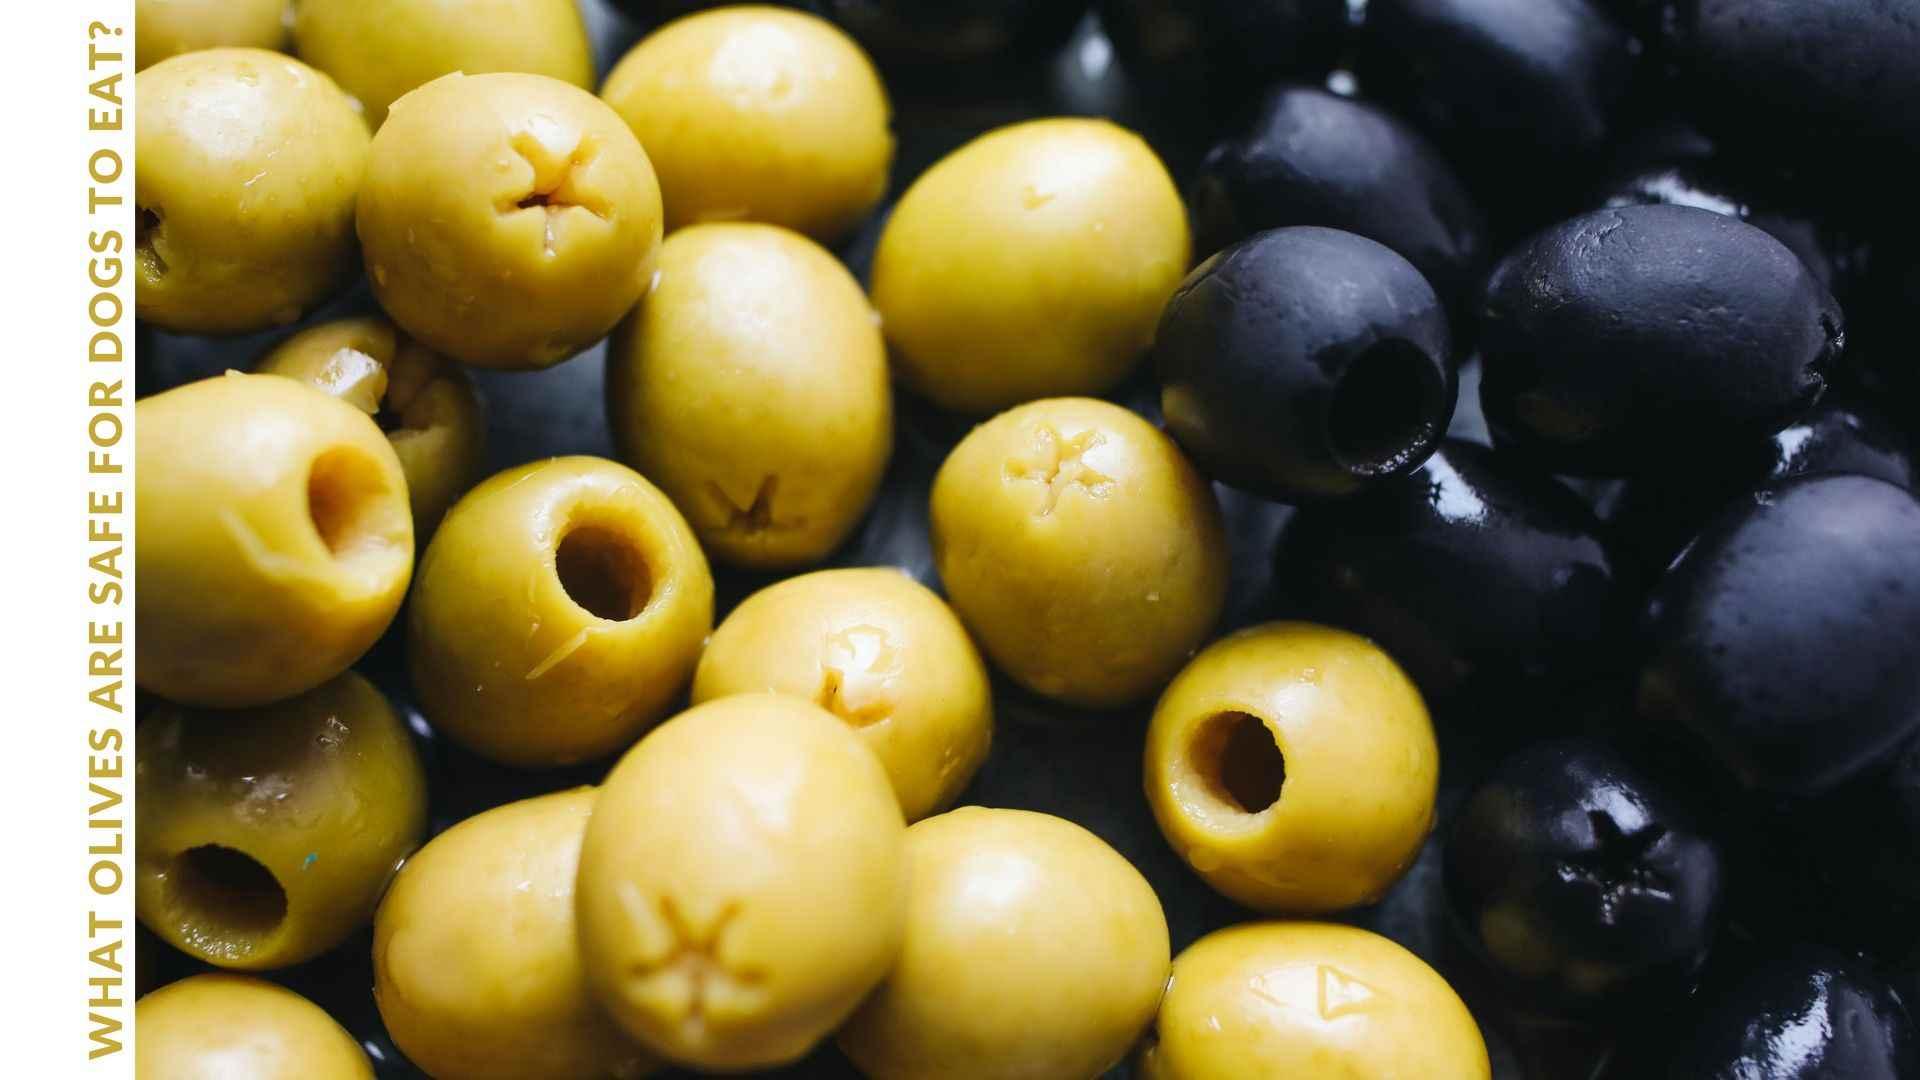 What olives are safe for dogs to eat?